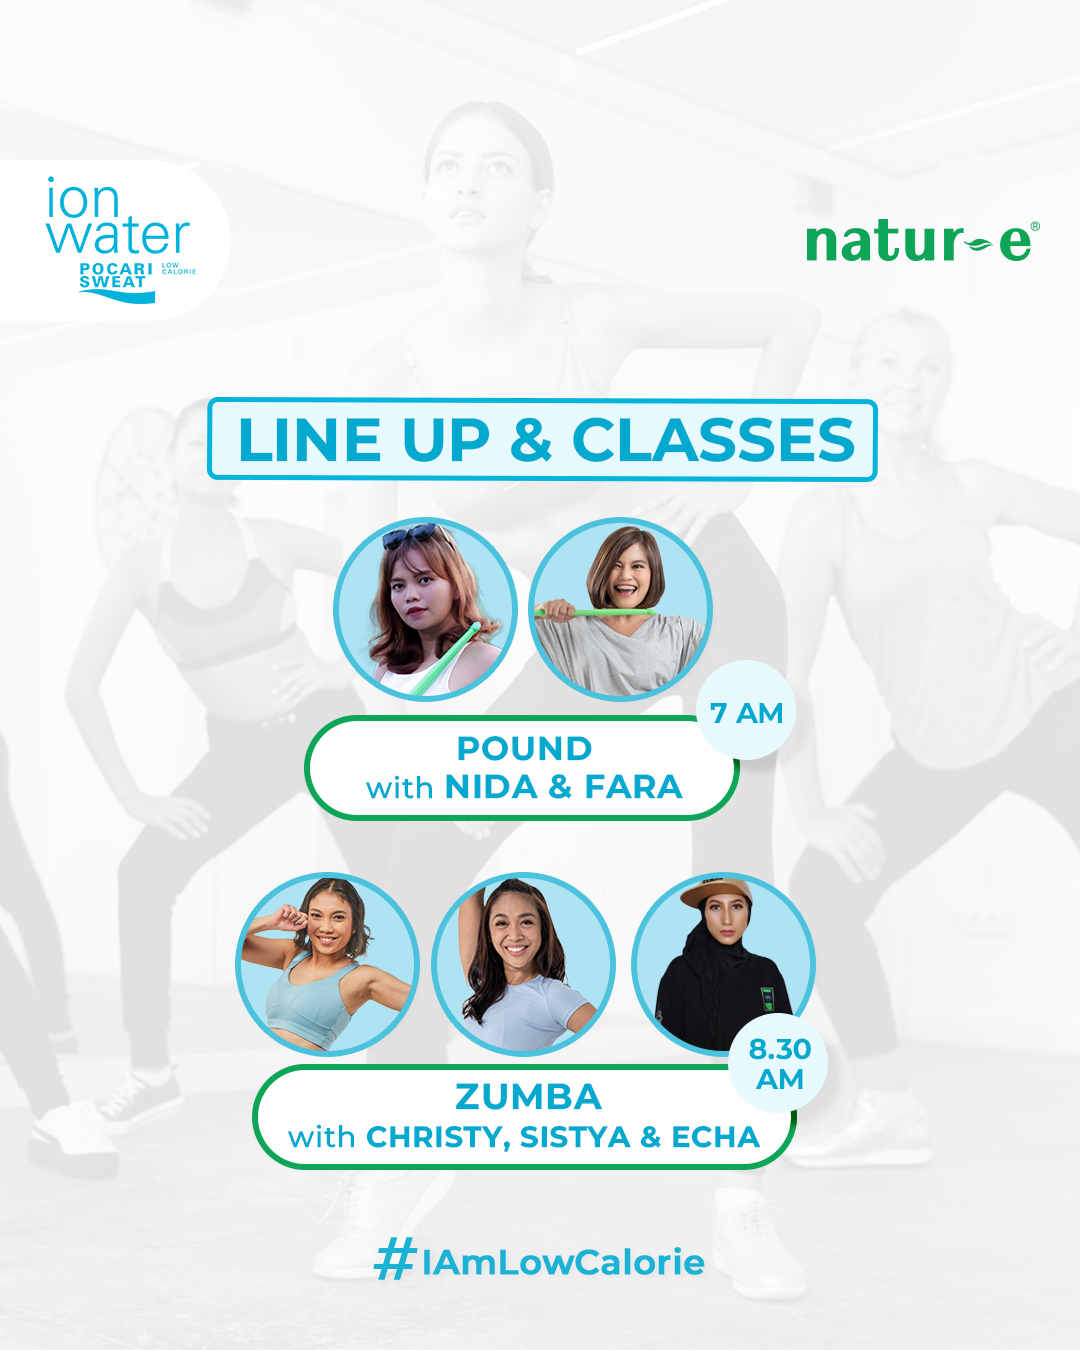 ION WATER Special Workout Class with Natur-E - POUND